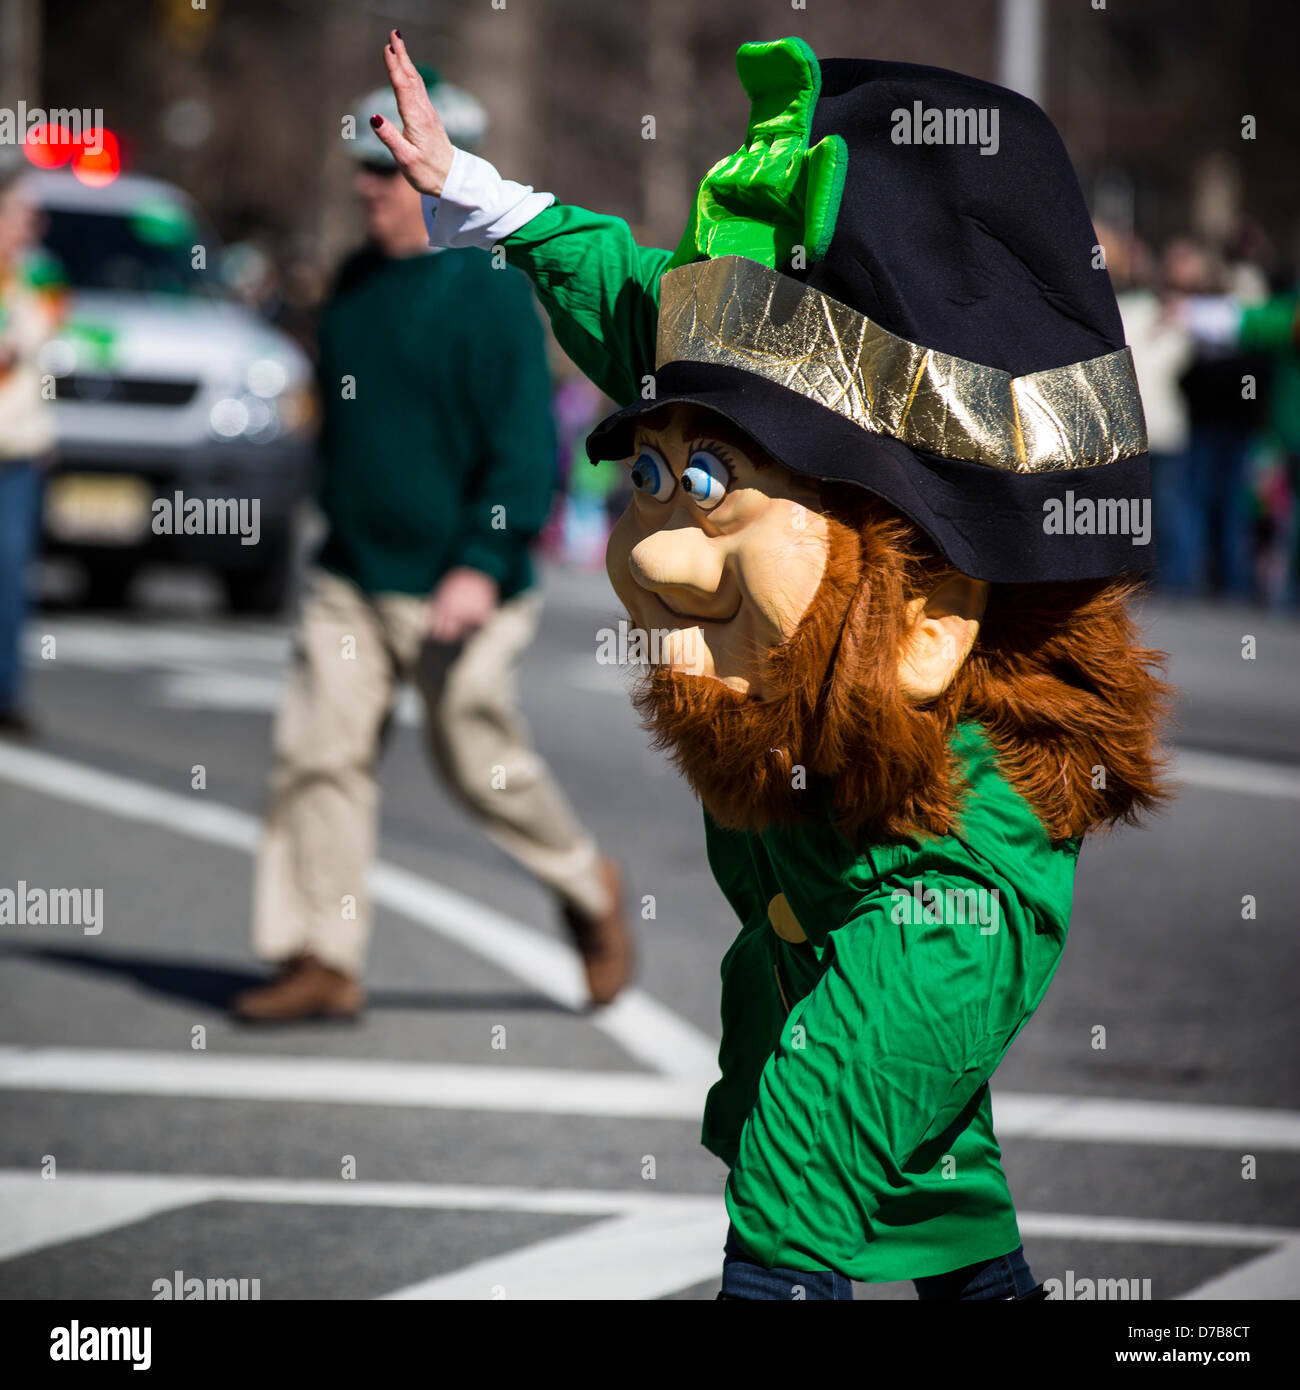 56 Penguins St Patricks Day Jersey Stock Photos, High-Res Pictures